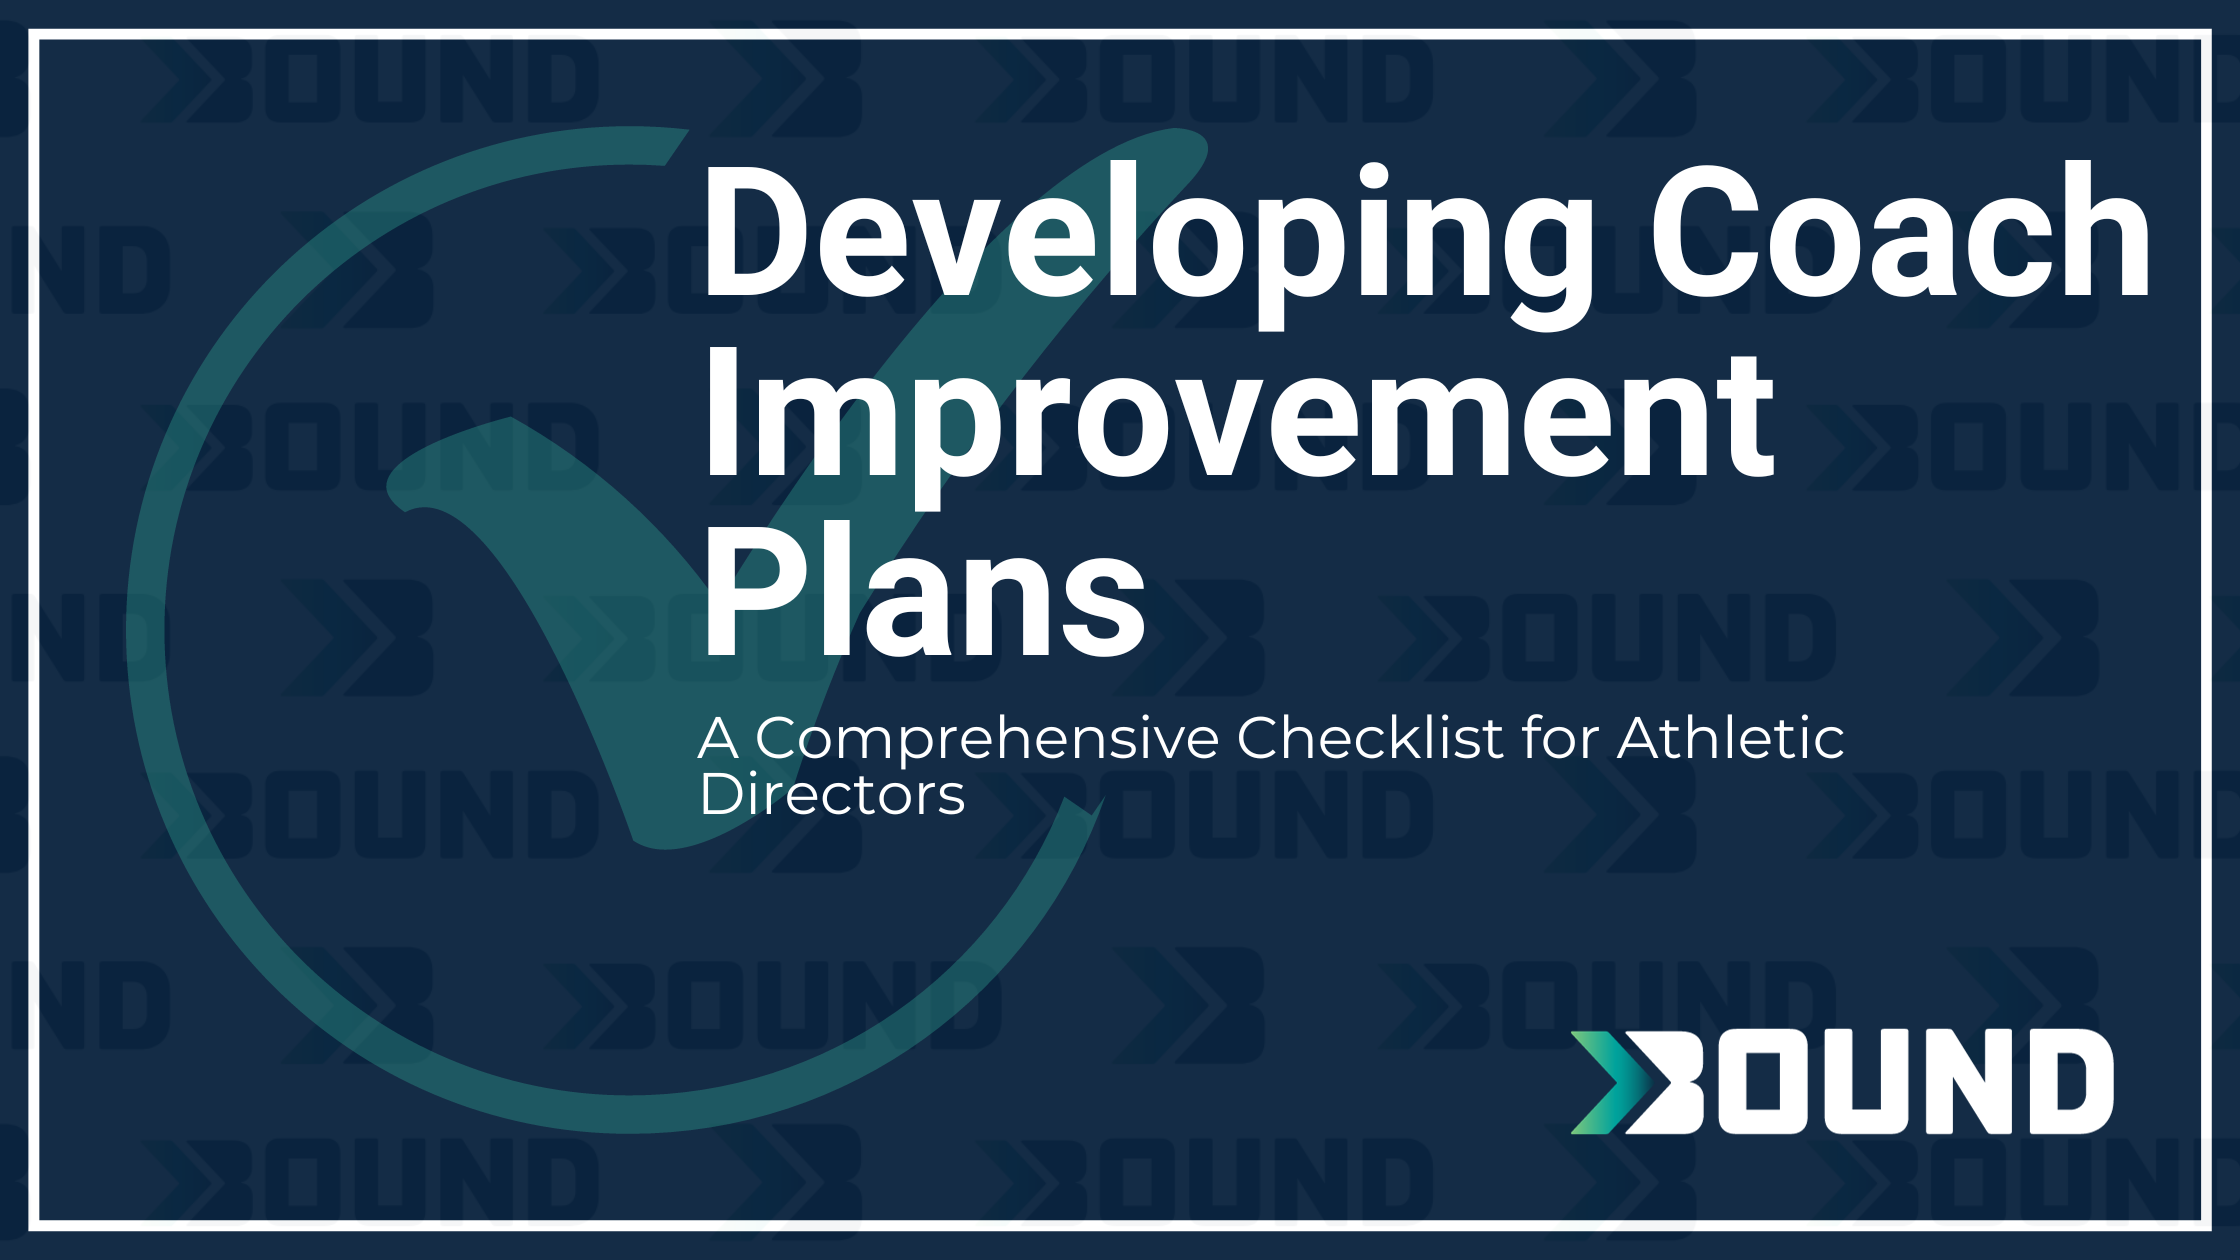 Developing & Implementing Coach Improvement Plans: A Guide for Athletic Directors